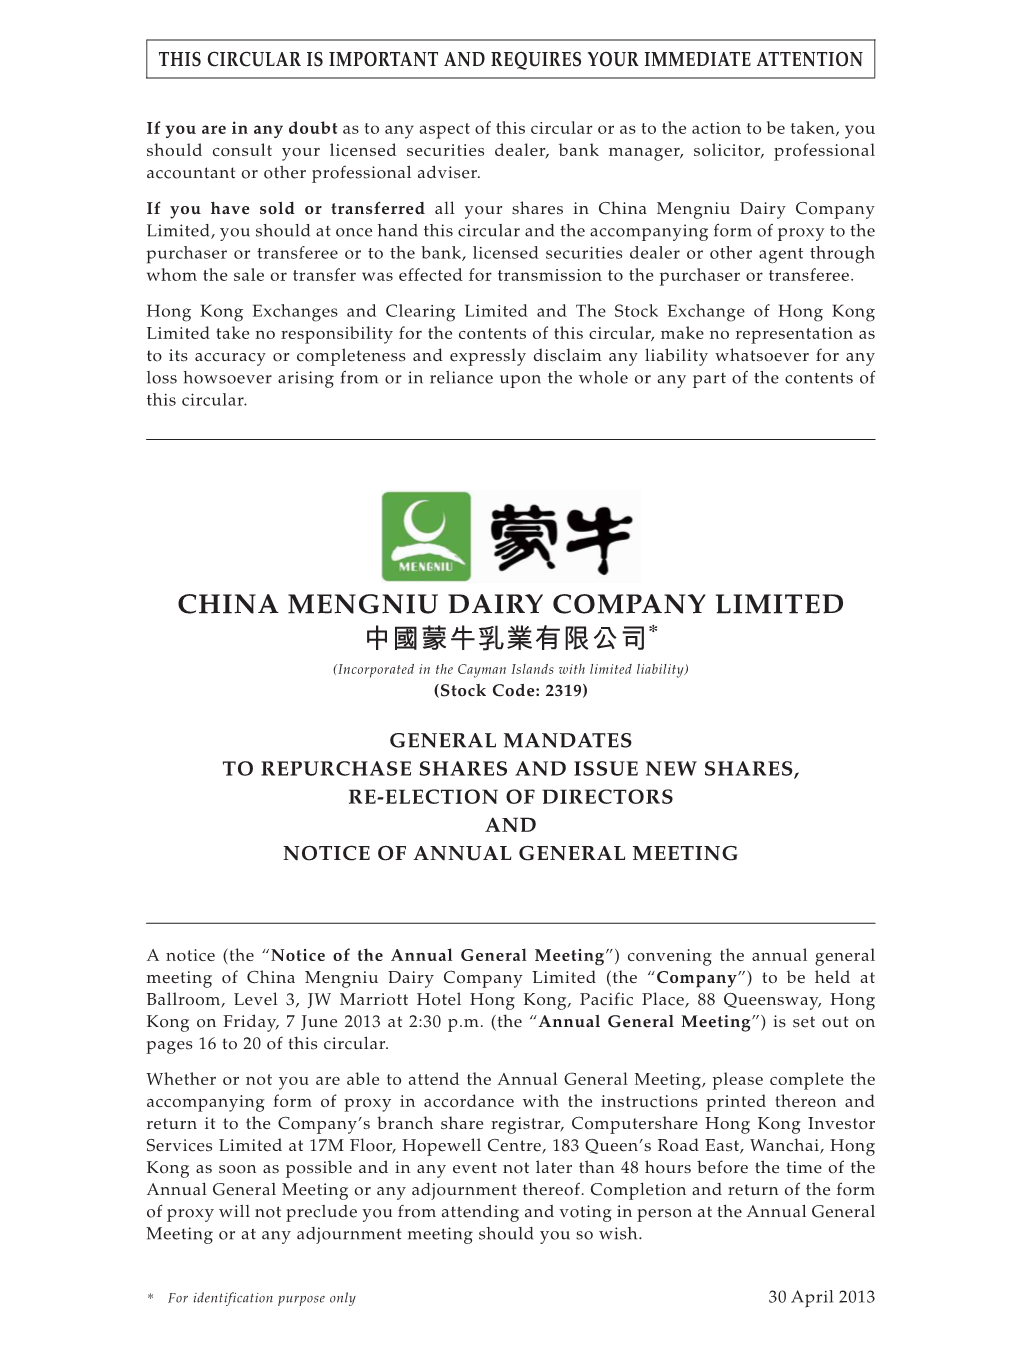 CHINA MENGNIU DAIRY COMPANY LIMITED 中國蒙牛乳業有限公司* (Incorporated in the Cayman Islands with Limited Liability) (Stock Code: 2319)